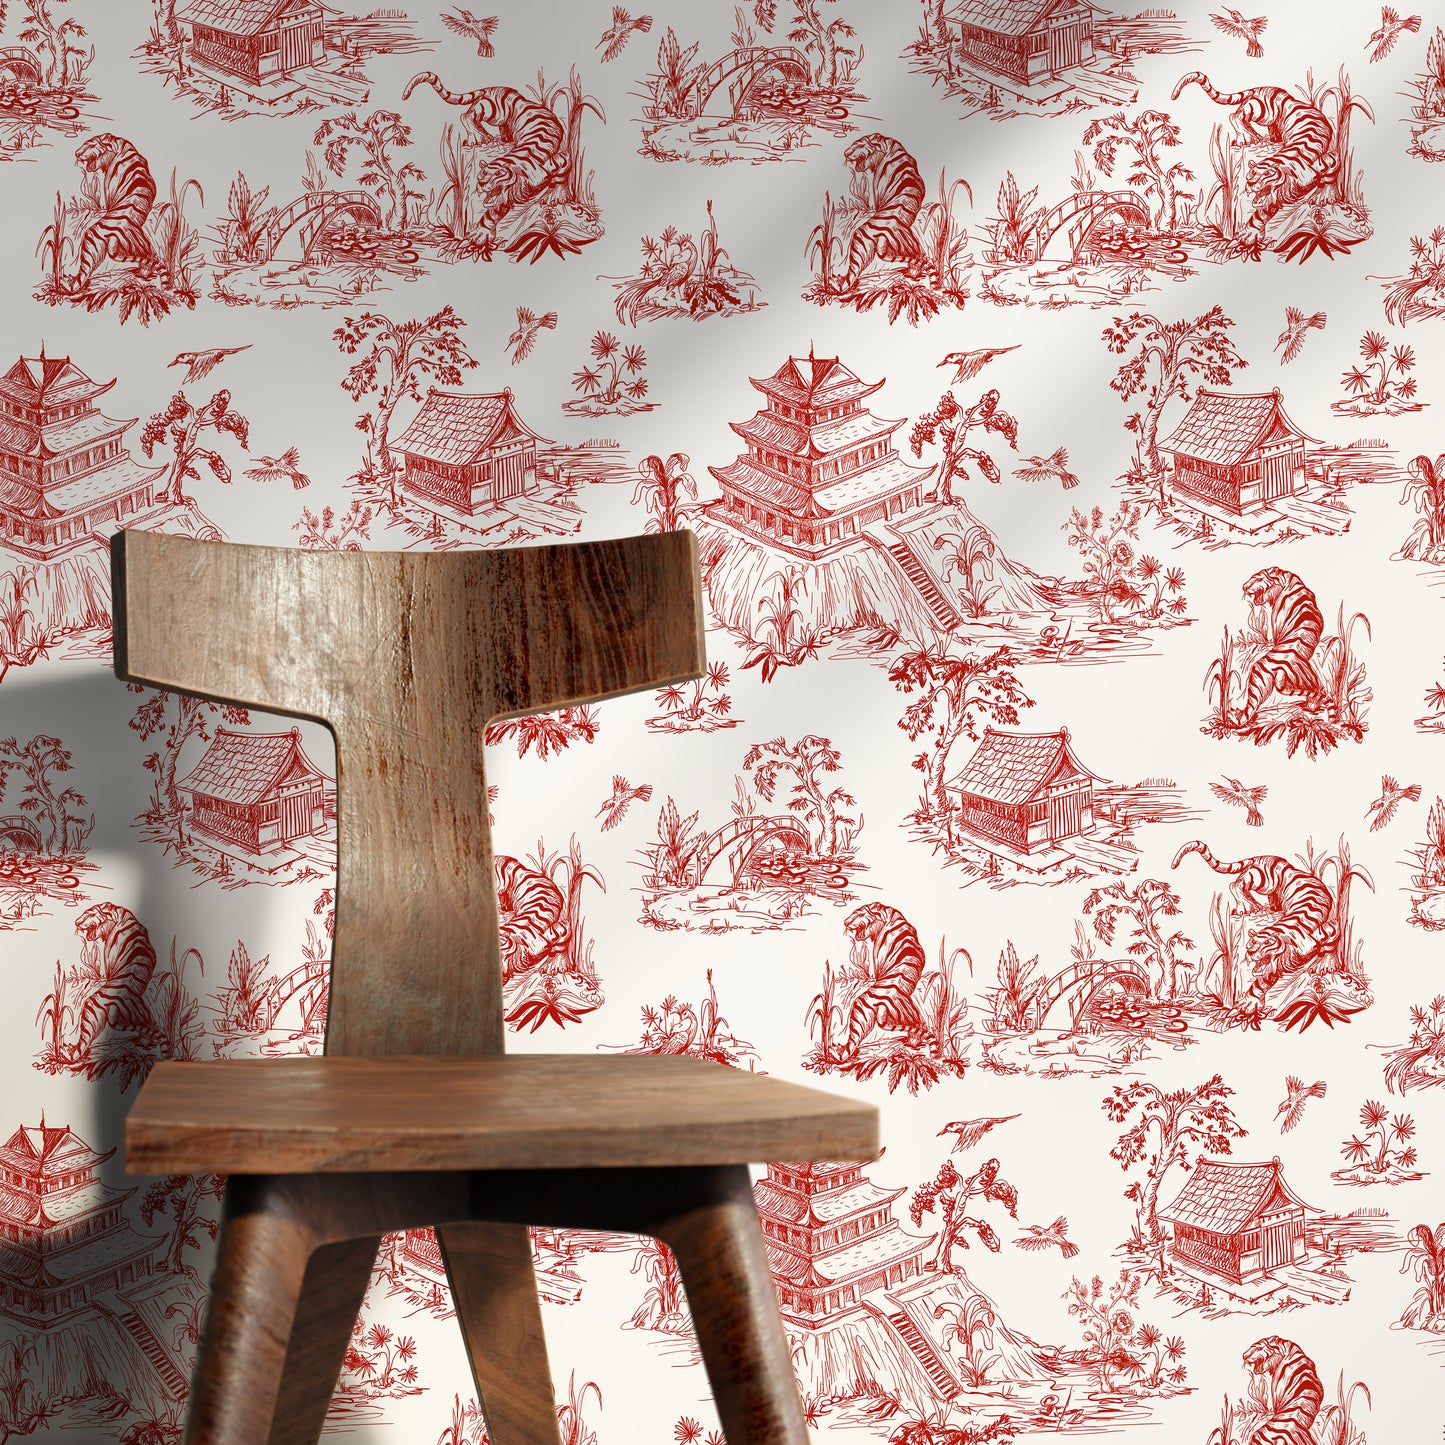 Wall Decor Wallpaper Peel and Stick Wallpaper Removable Wallpaper Home Decor Wall Art Room Decor / Red Chinese Wallpaper - C105